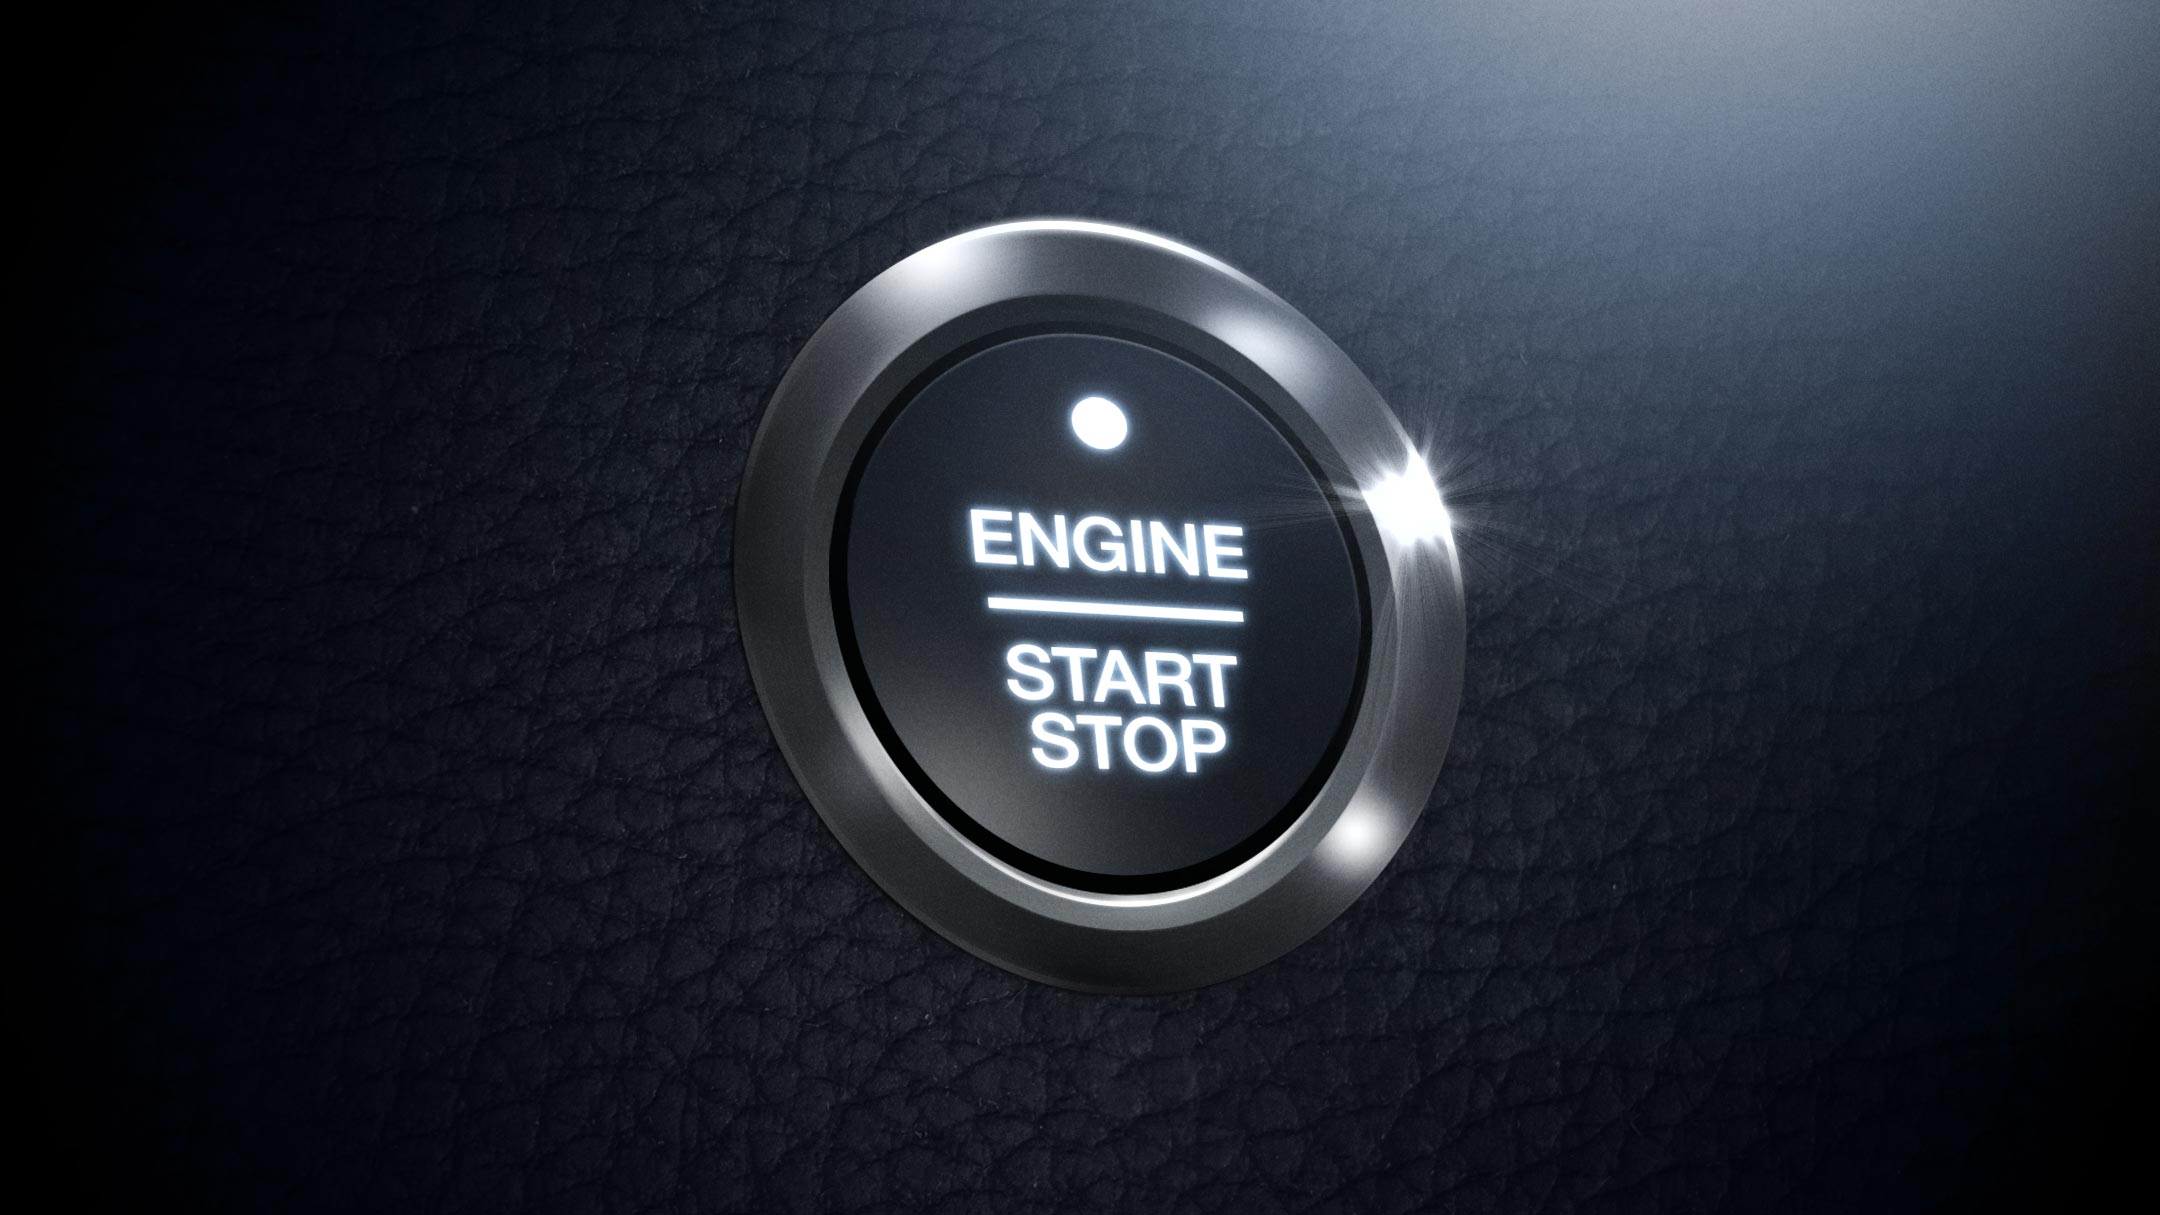 Ford power started button